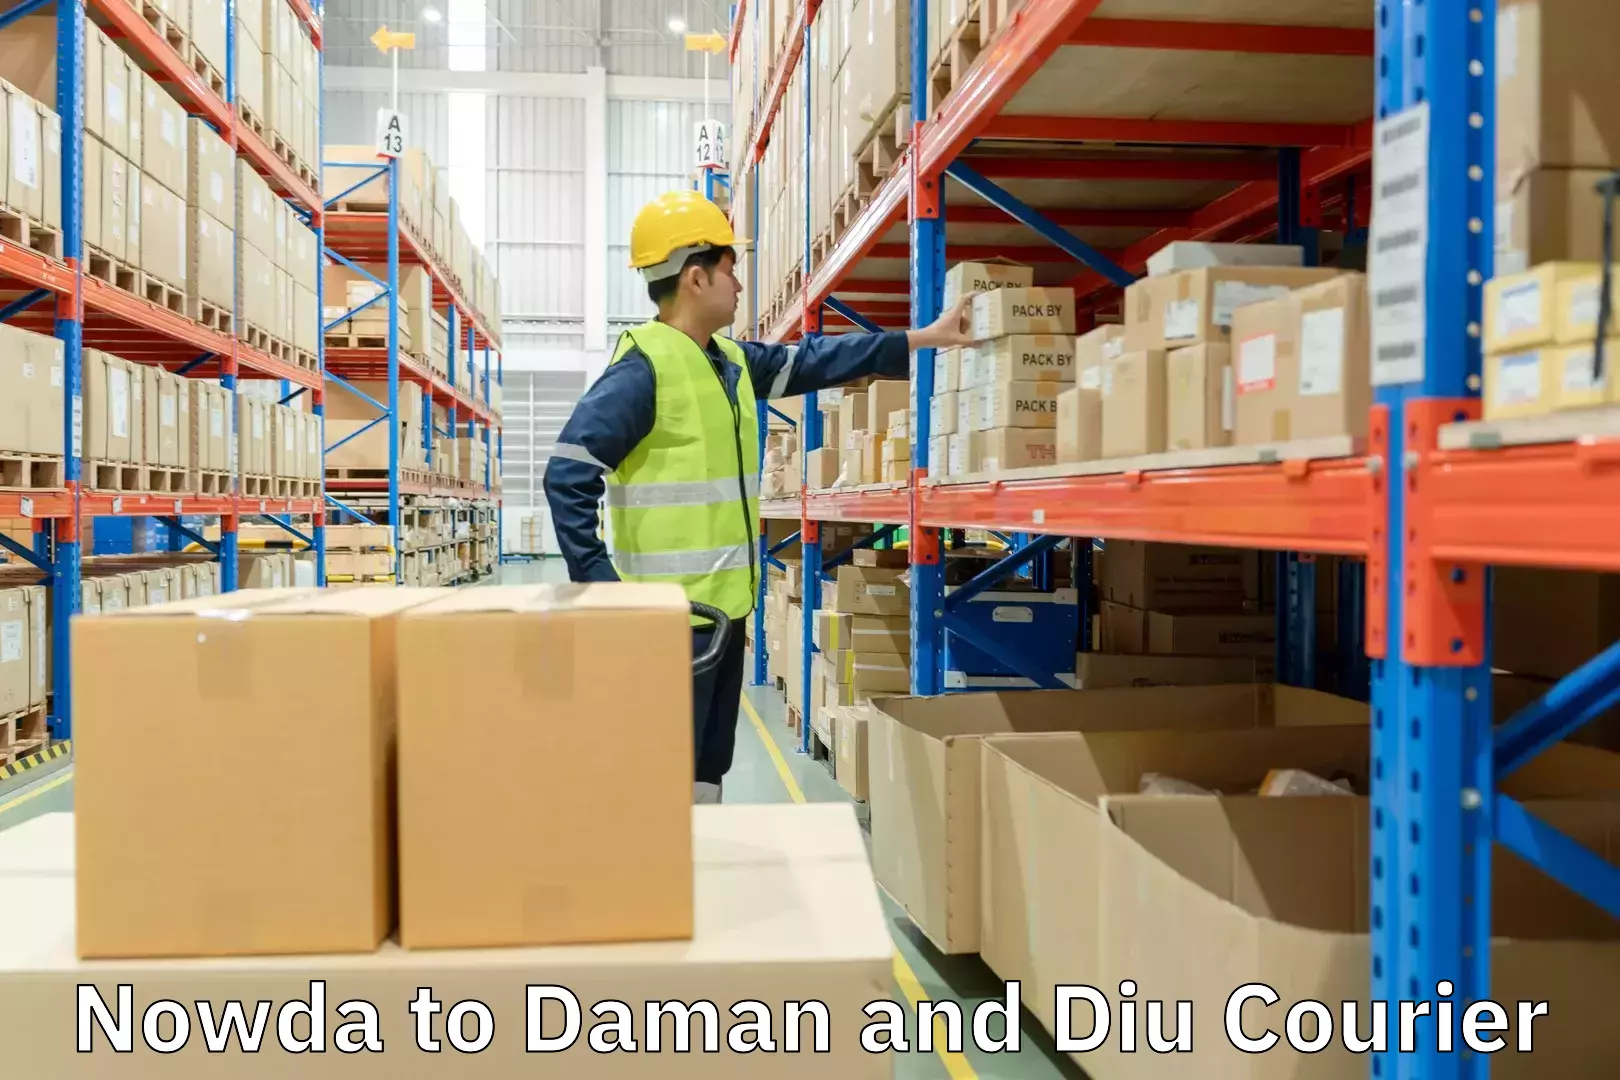 Business delivery service Nowda to Daman and Diu